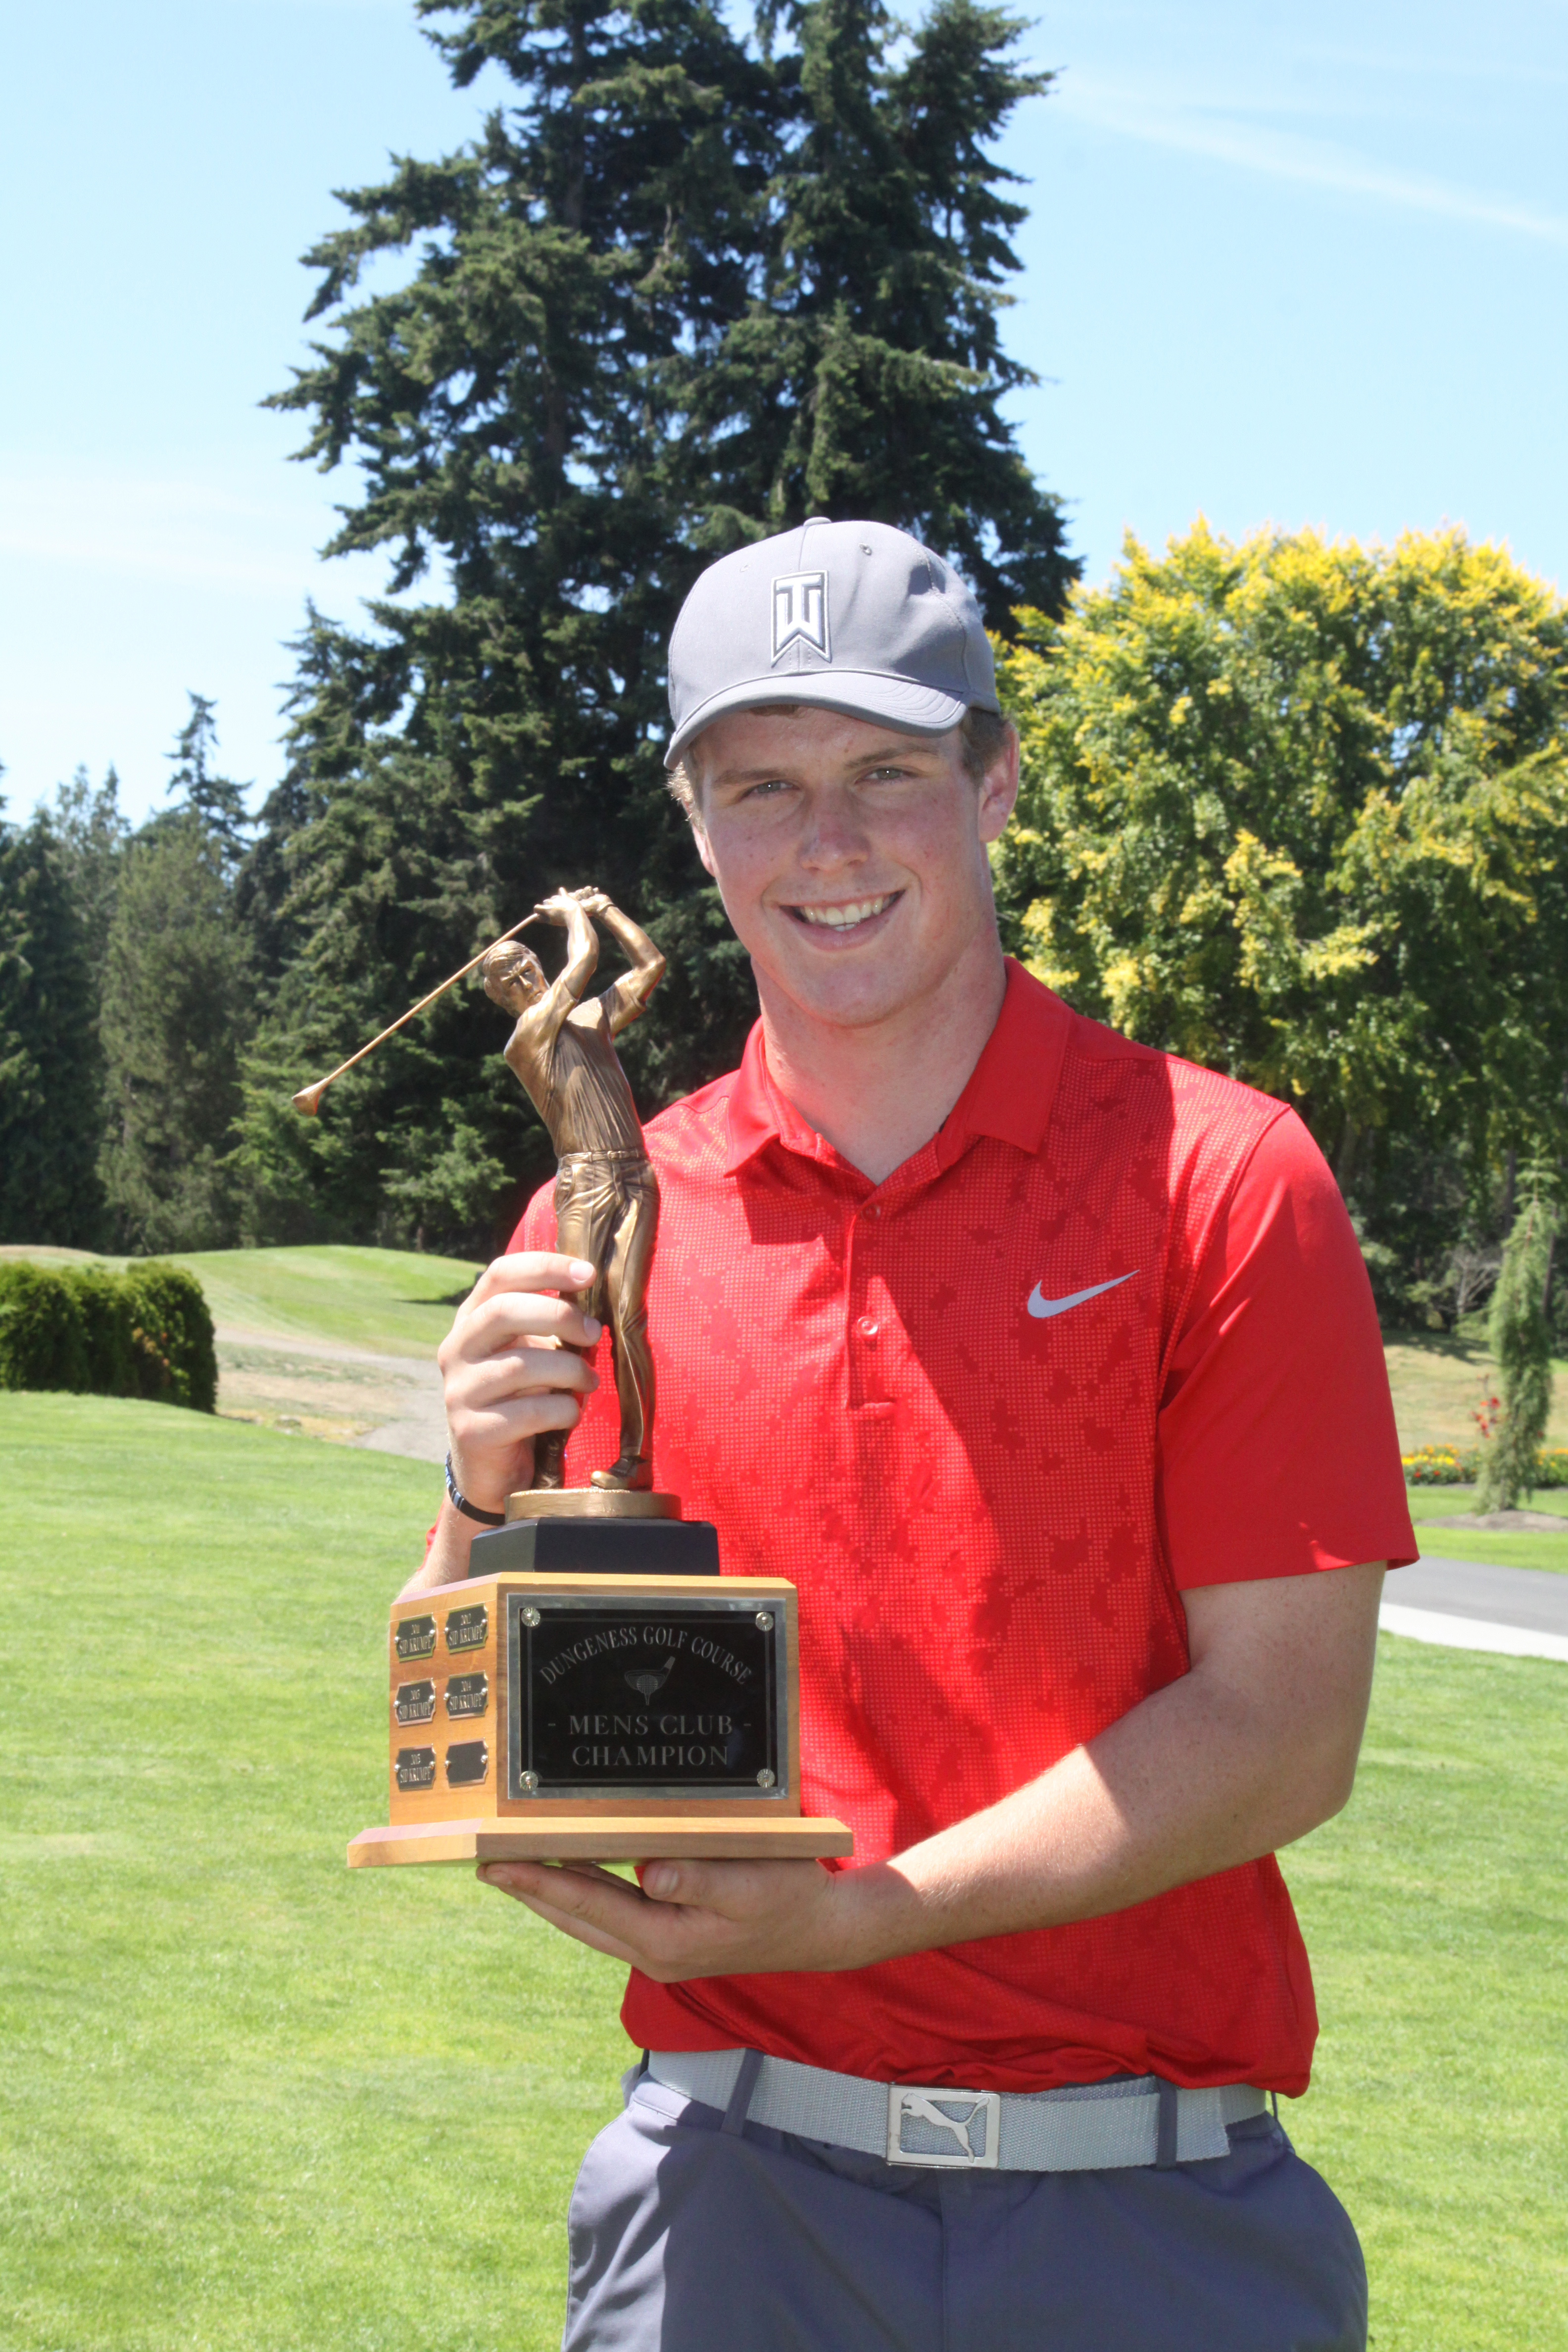 Sequim's Jack Shea holds the Clallam County Amateur Championship trophy after rallying to win the golf tournament by one stroke with a round of 5-under-par 67 at Cedars at Dungeness Golf Course in Sequim on Sunday. (Dave Logan/for Peninsula Daily News)